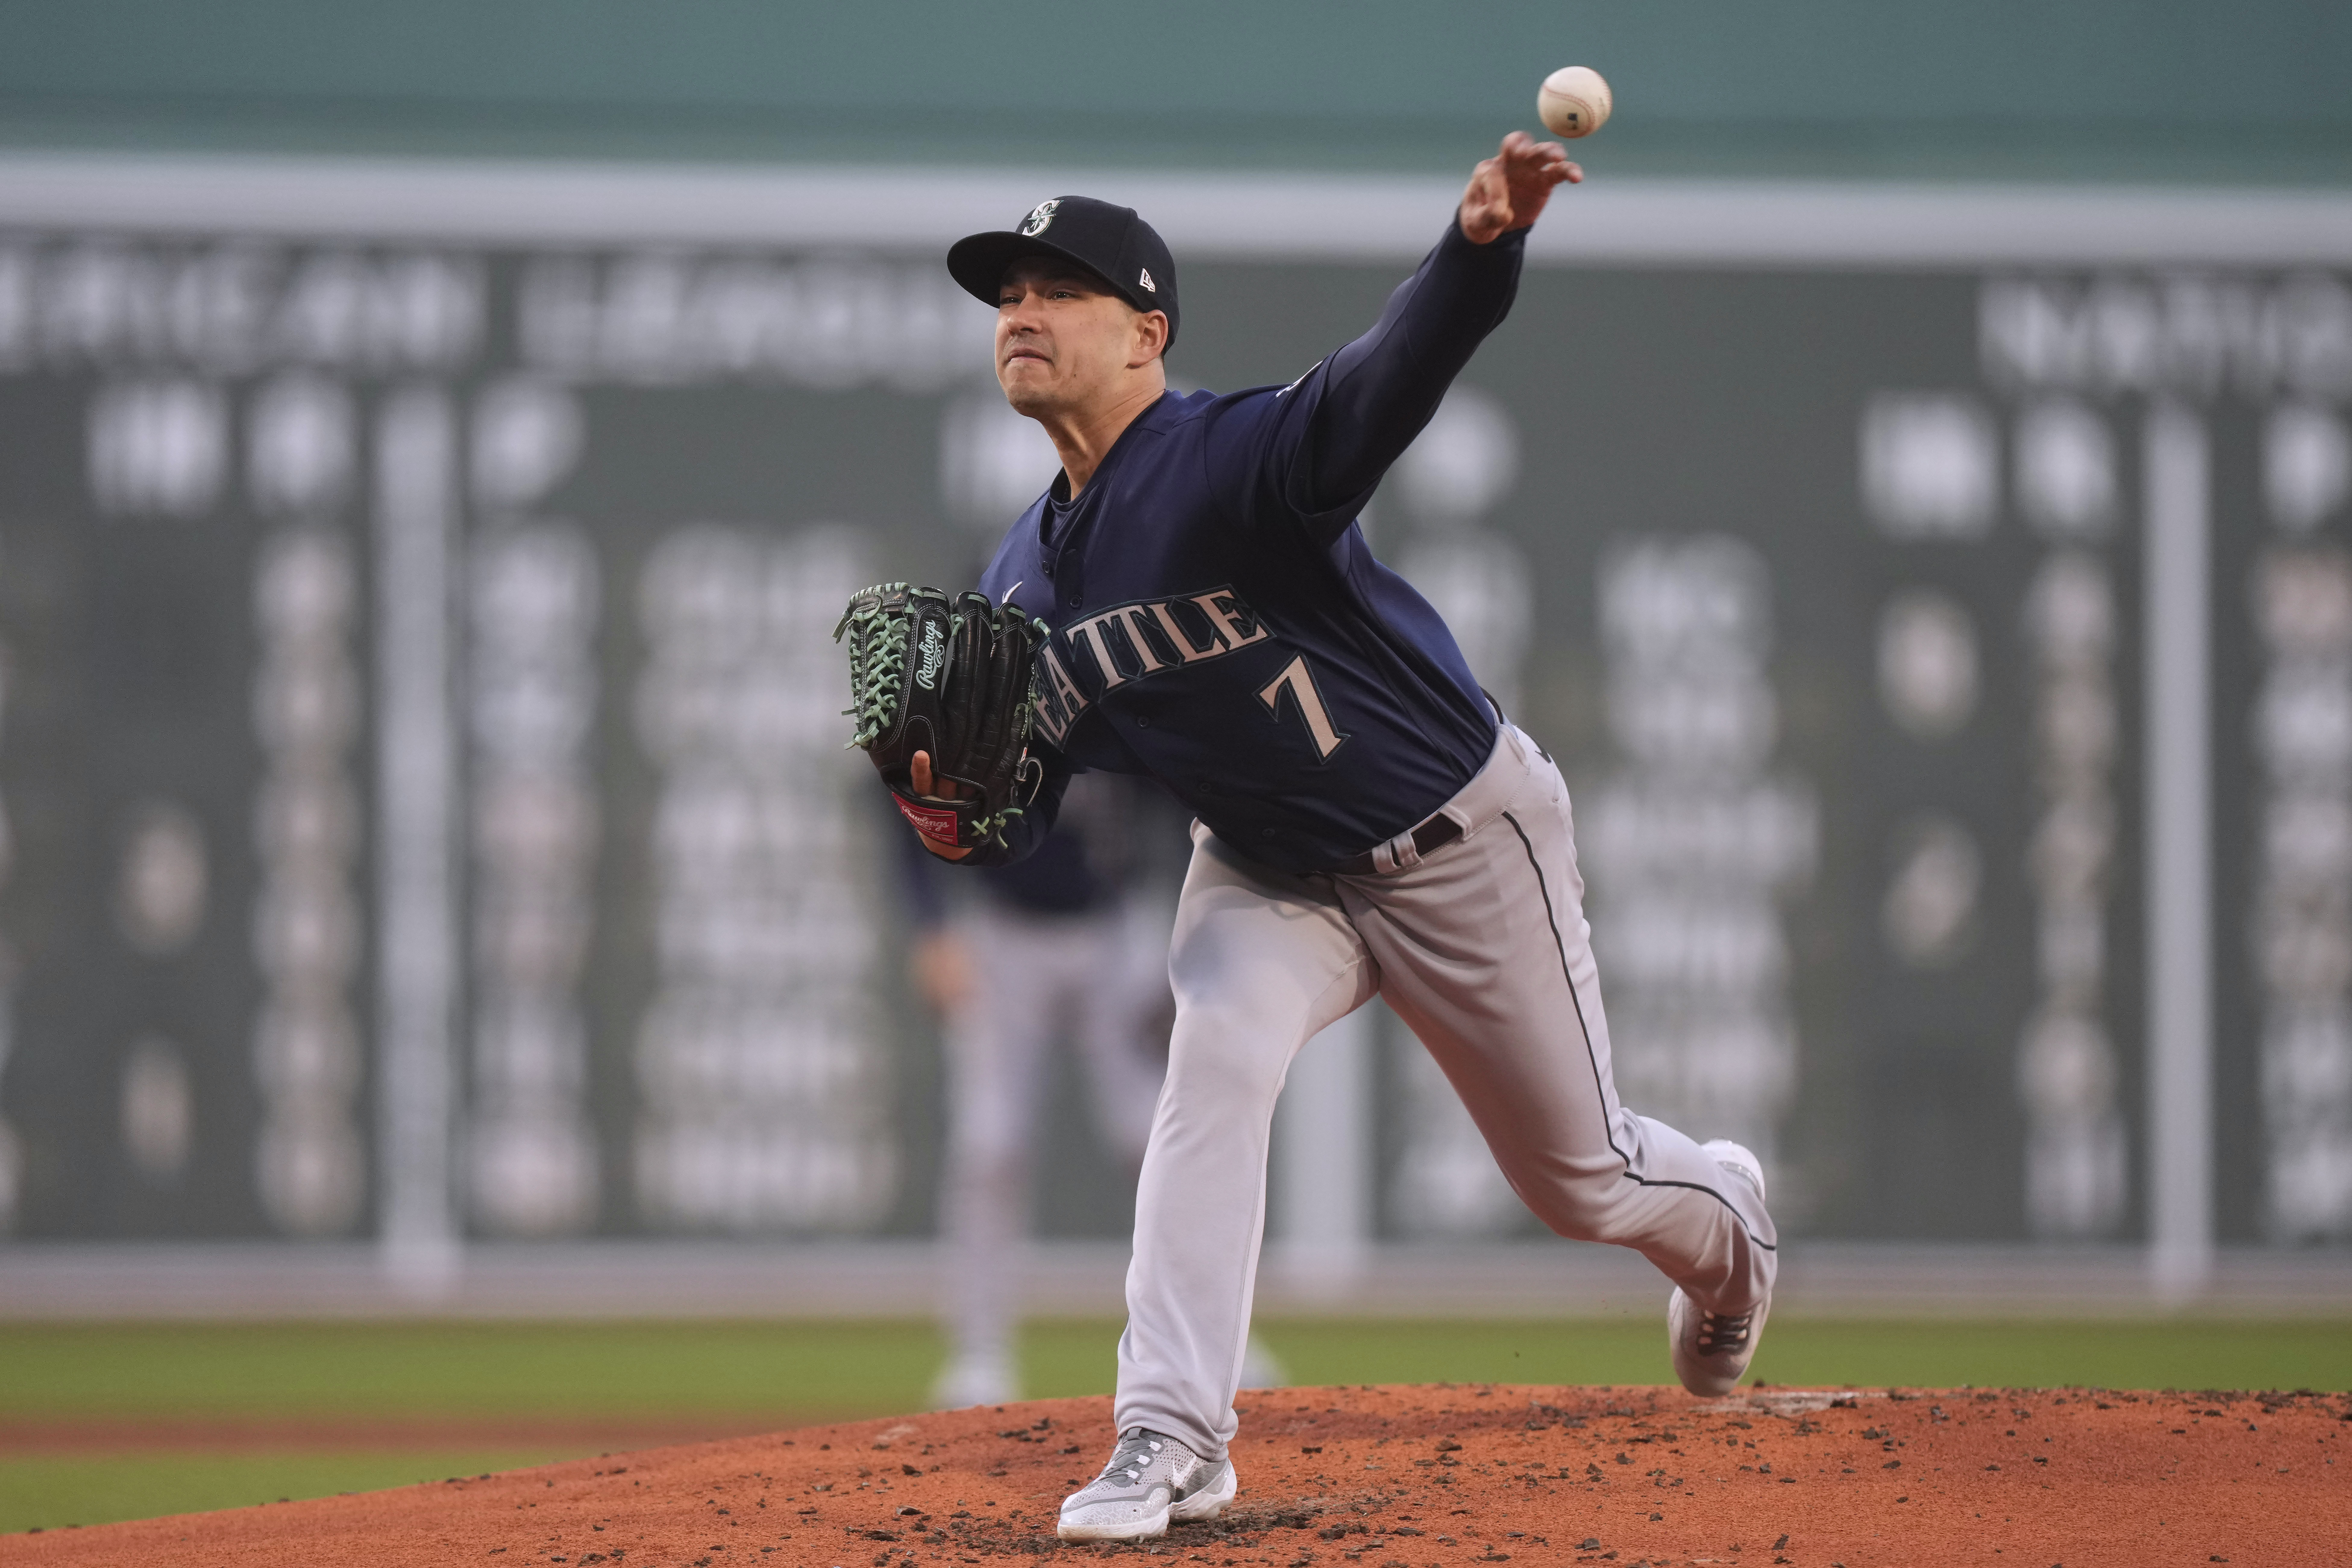 Count Marco Gonzales among those hopeful about and pulling for James Paxton  - The Boston Globe